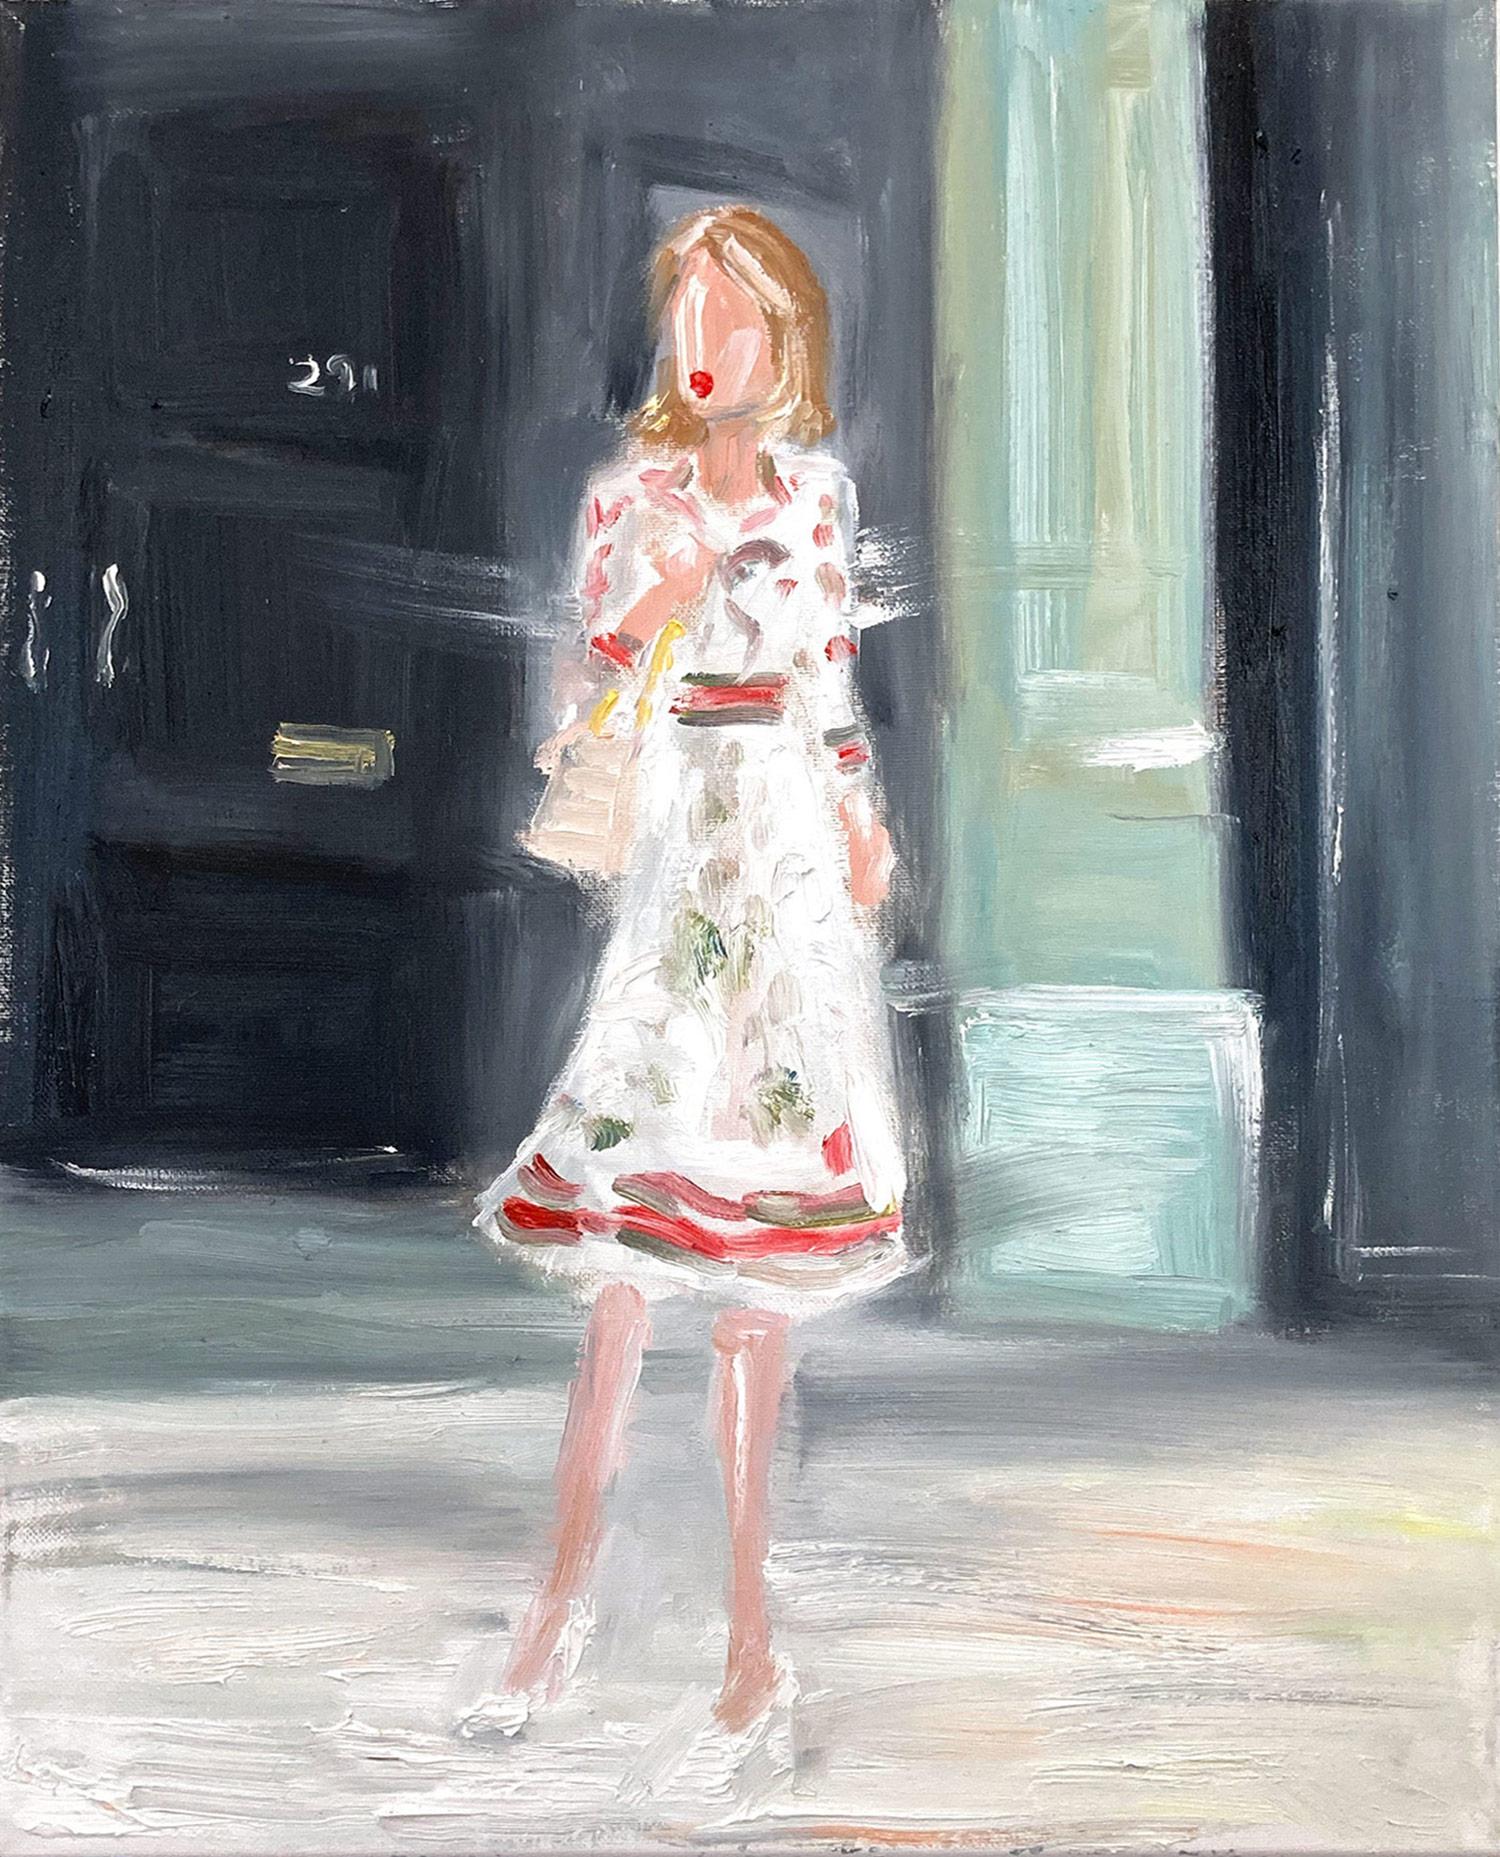 Cindy Shaoul Figurative Painting - "Stepping Out in London" Impressionist Oil Painting on Canvas in Gucci Dress